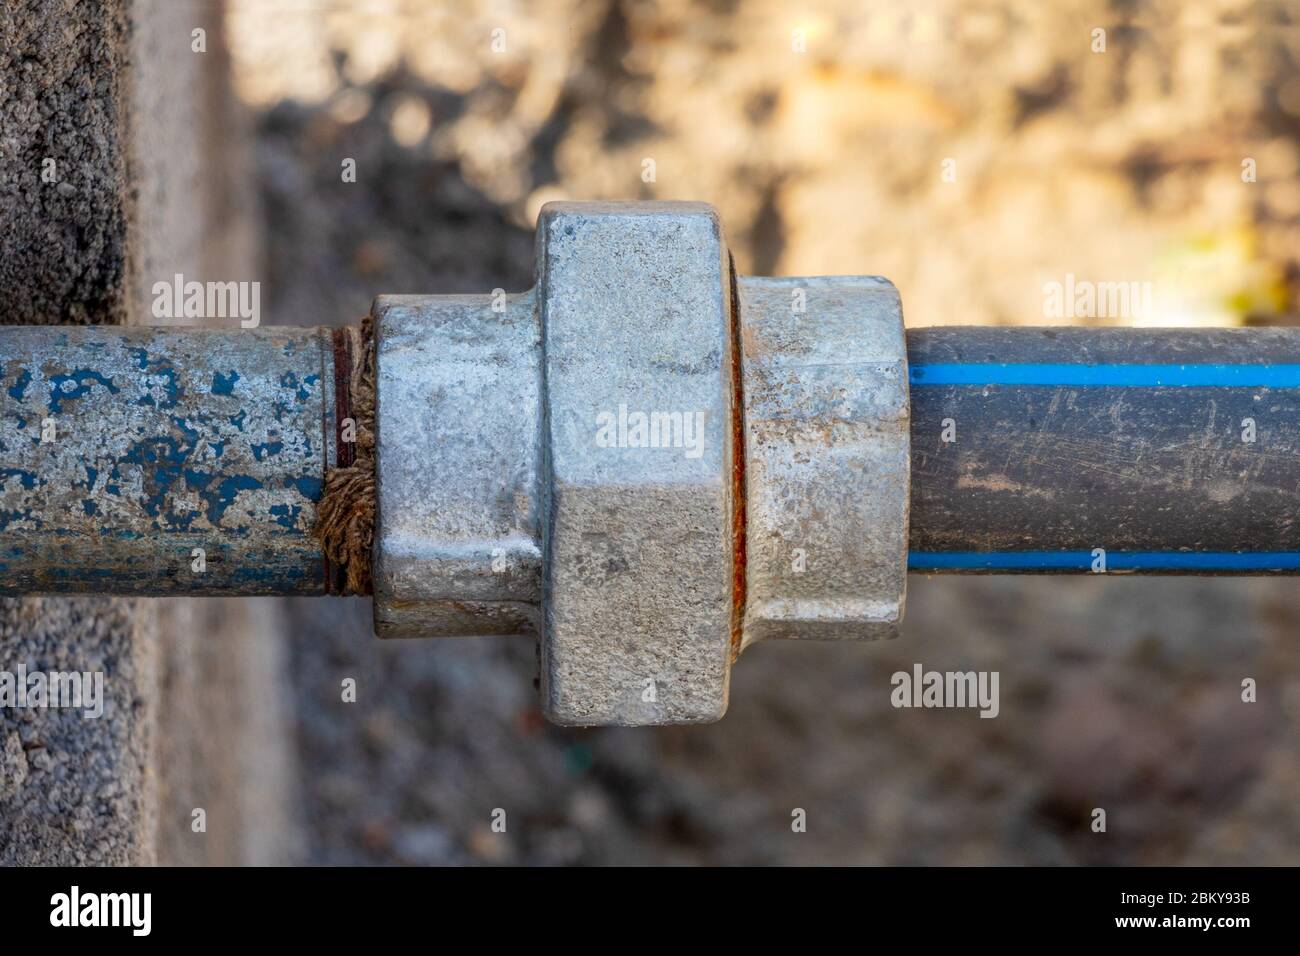 Pipe Union, Joint of plastic (PVC) and Steel pipe, close-up Stock Photo